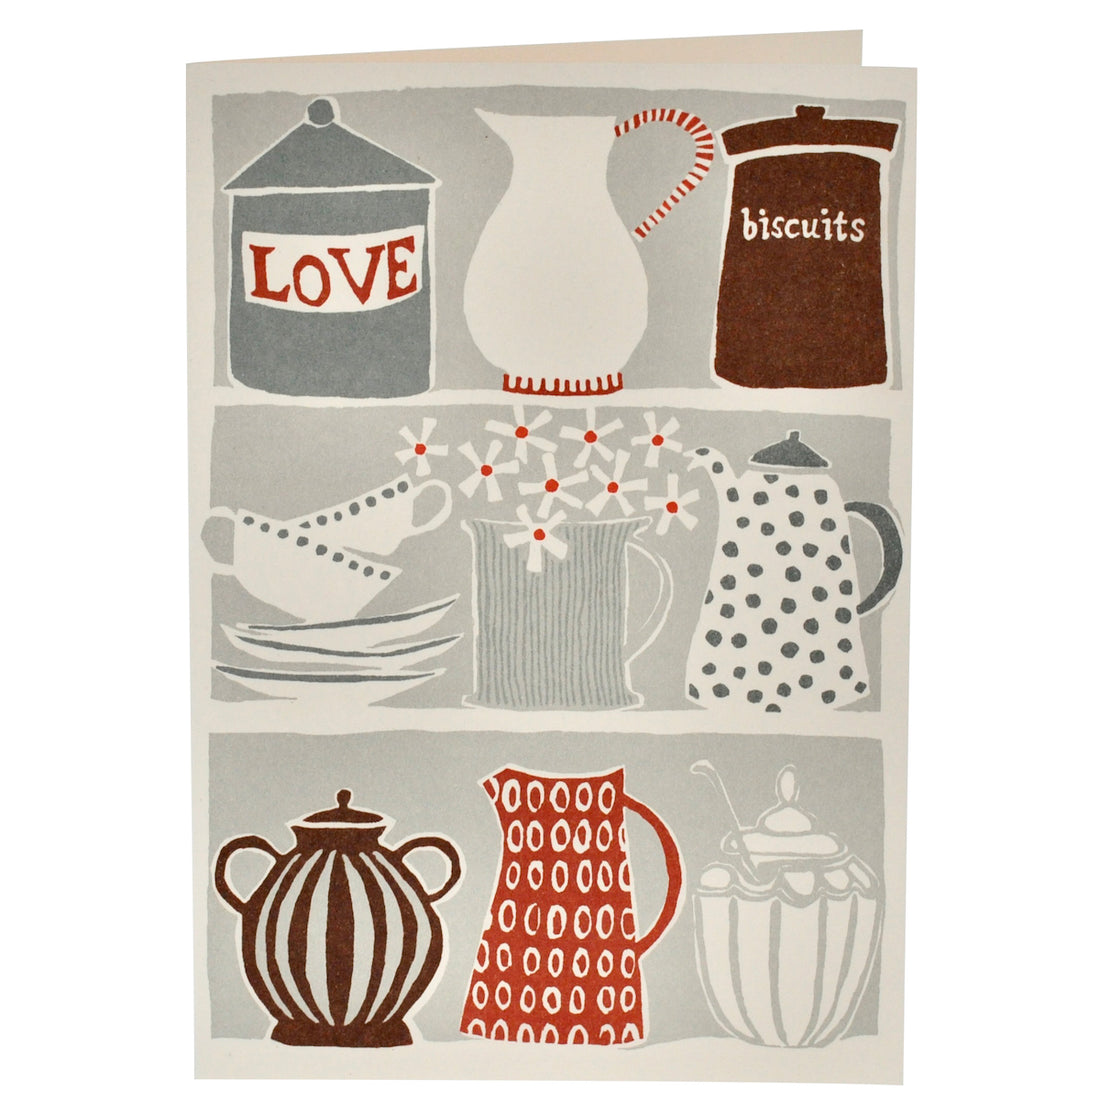 Illustration of various kitchenware items including containers labeled &quot;Love Biscuits Card,&quot; and teapots with different patterns, printed on FSC-certified stock by Cambridge Imprint.